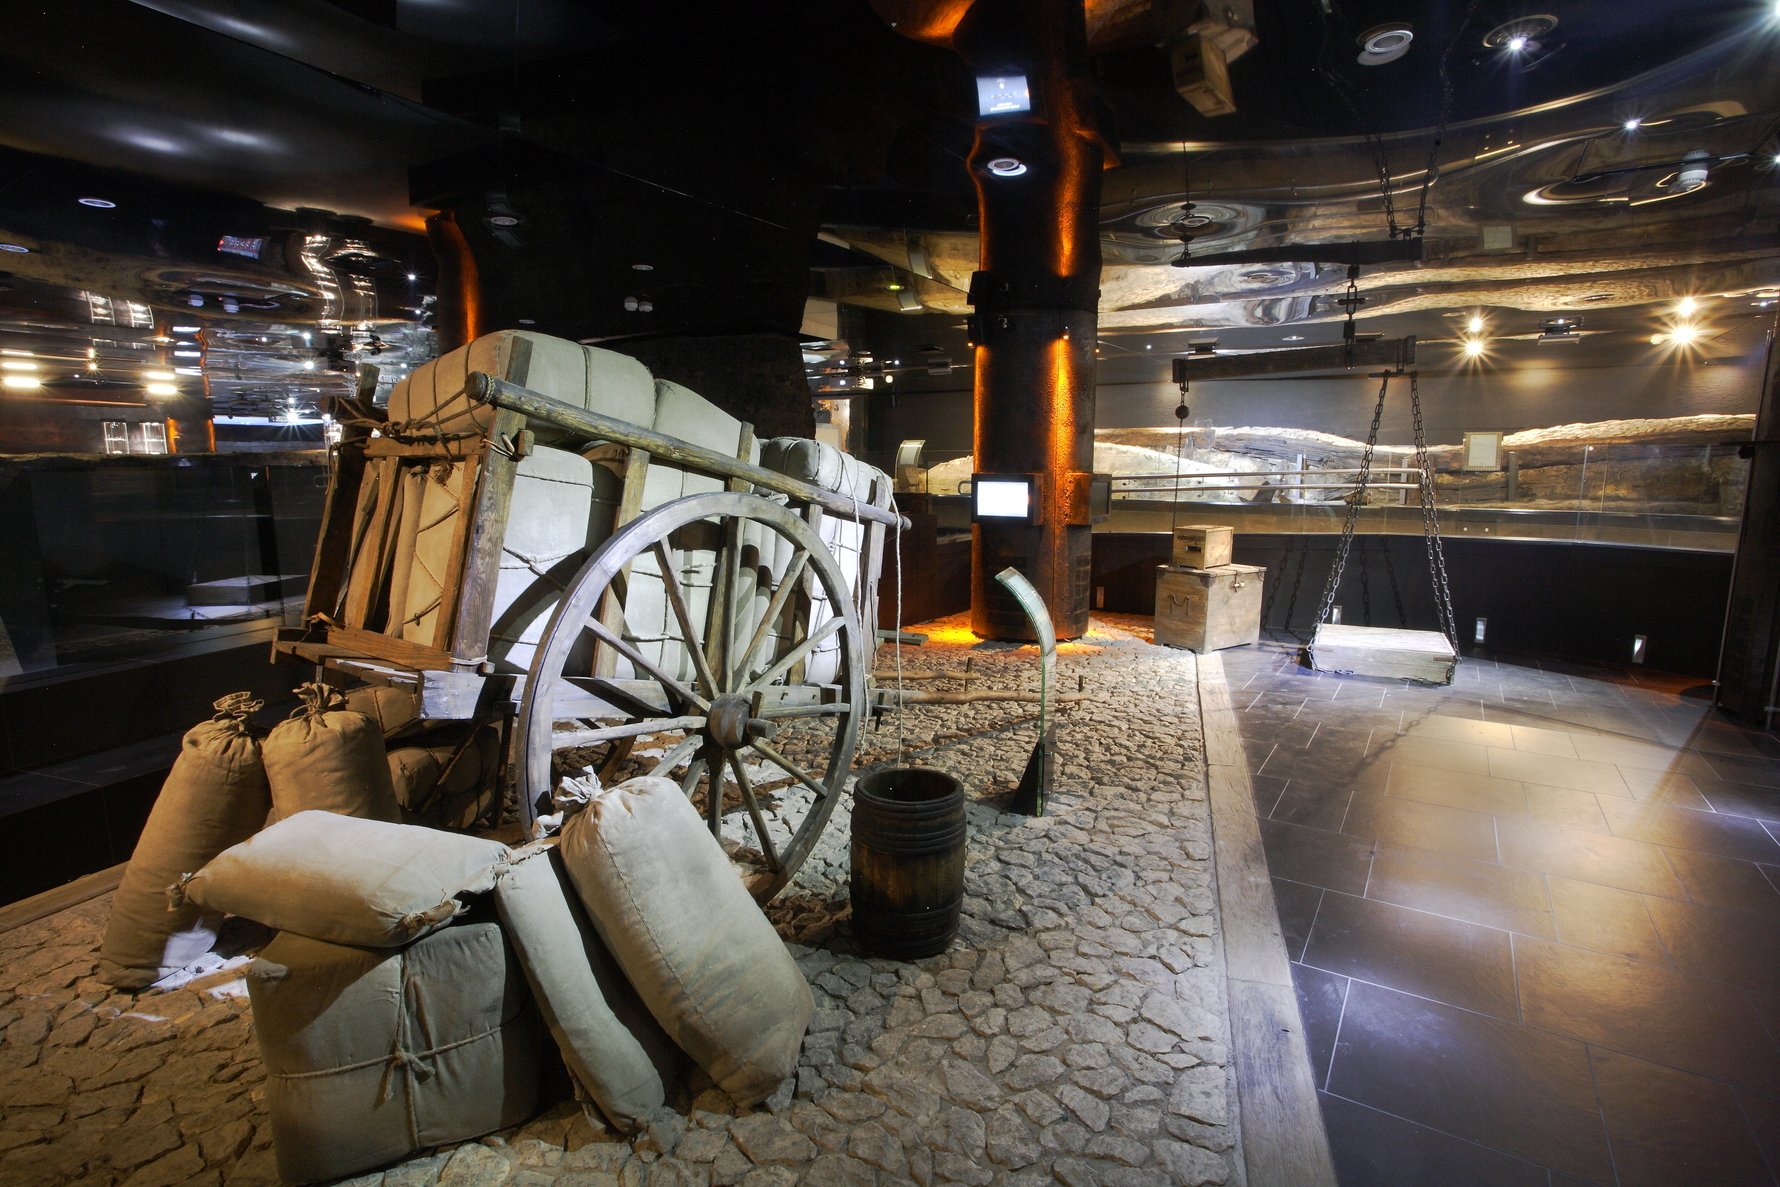 Rynek Underground Museum Tickets and Guided Tours